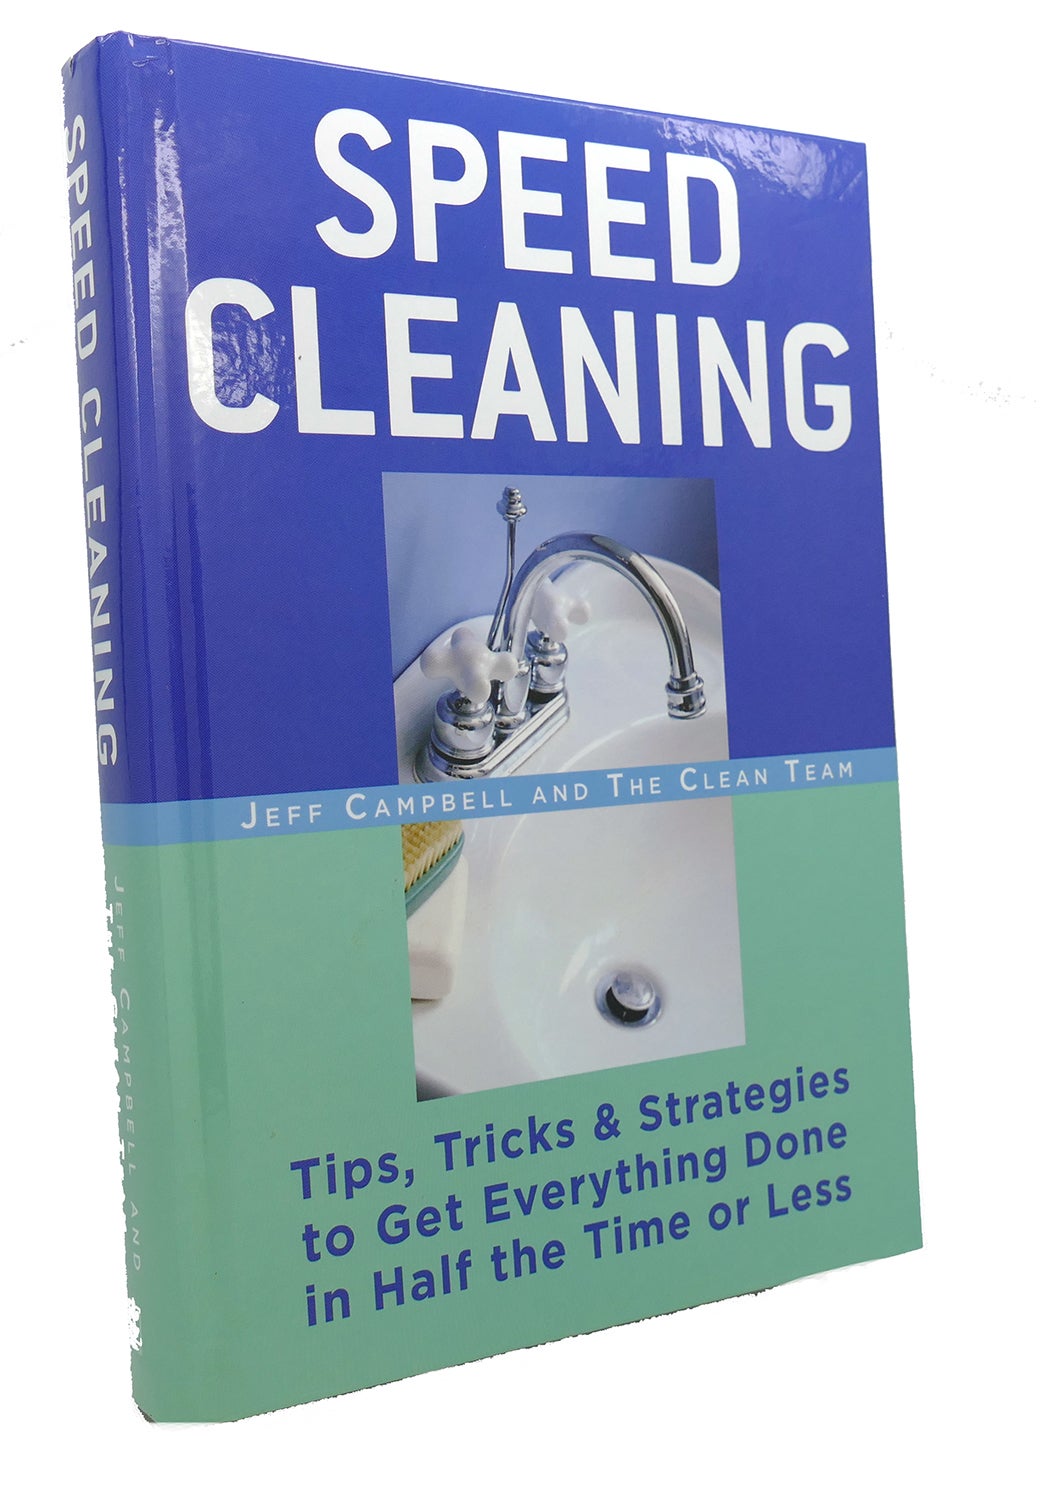 Speed Cleaning: Tips, Tricks & Strategies to Get Everything Done in Half the Time Or Less [Book]